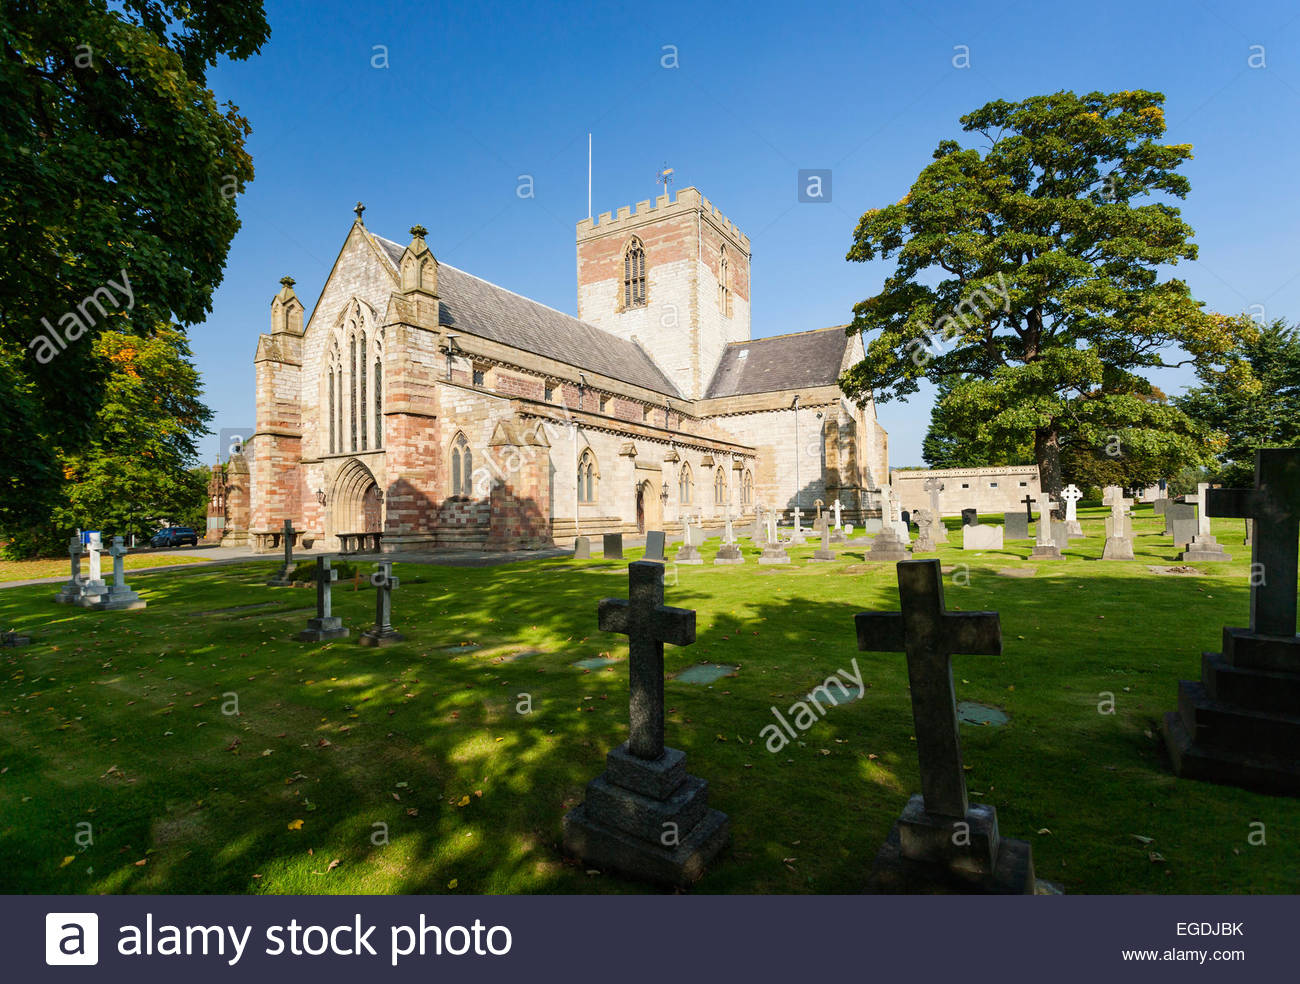 St Asaph Cathedral, St Asaph, Denbighshire, North Wales. Stock Photo